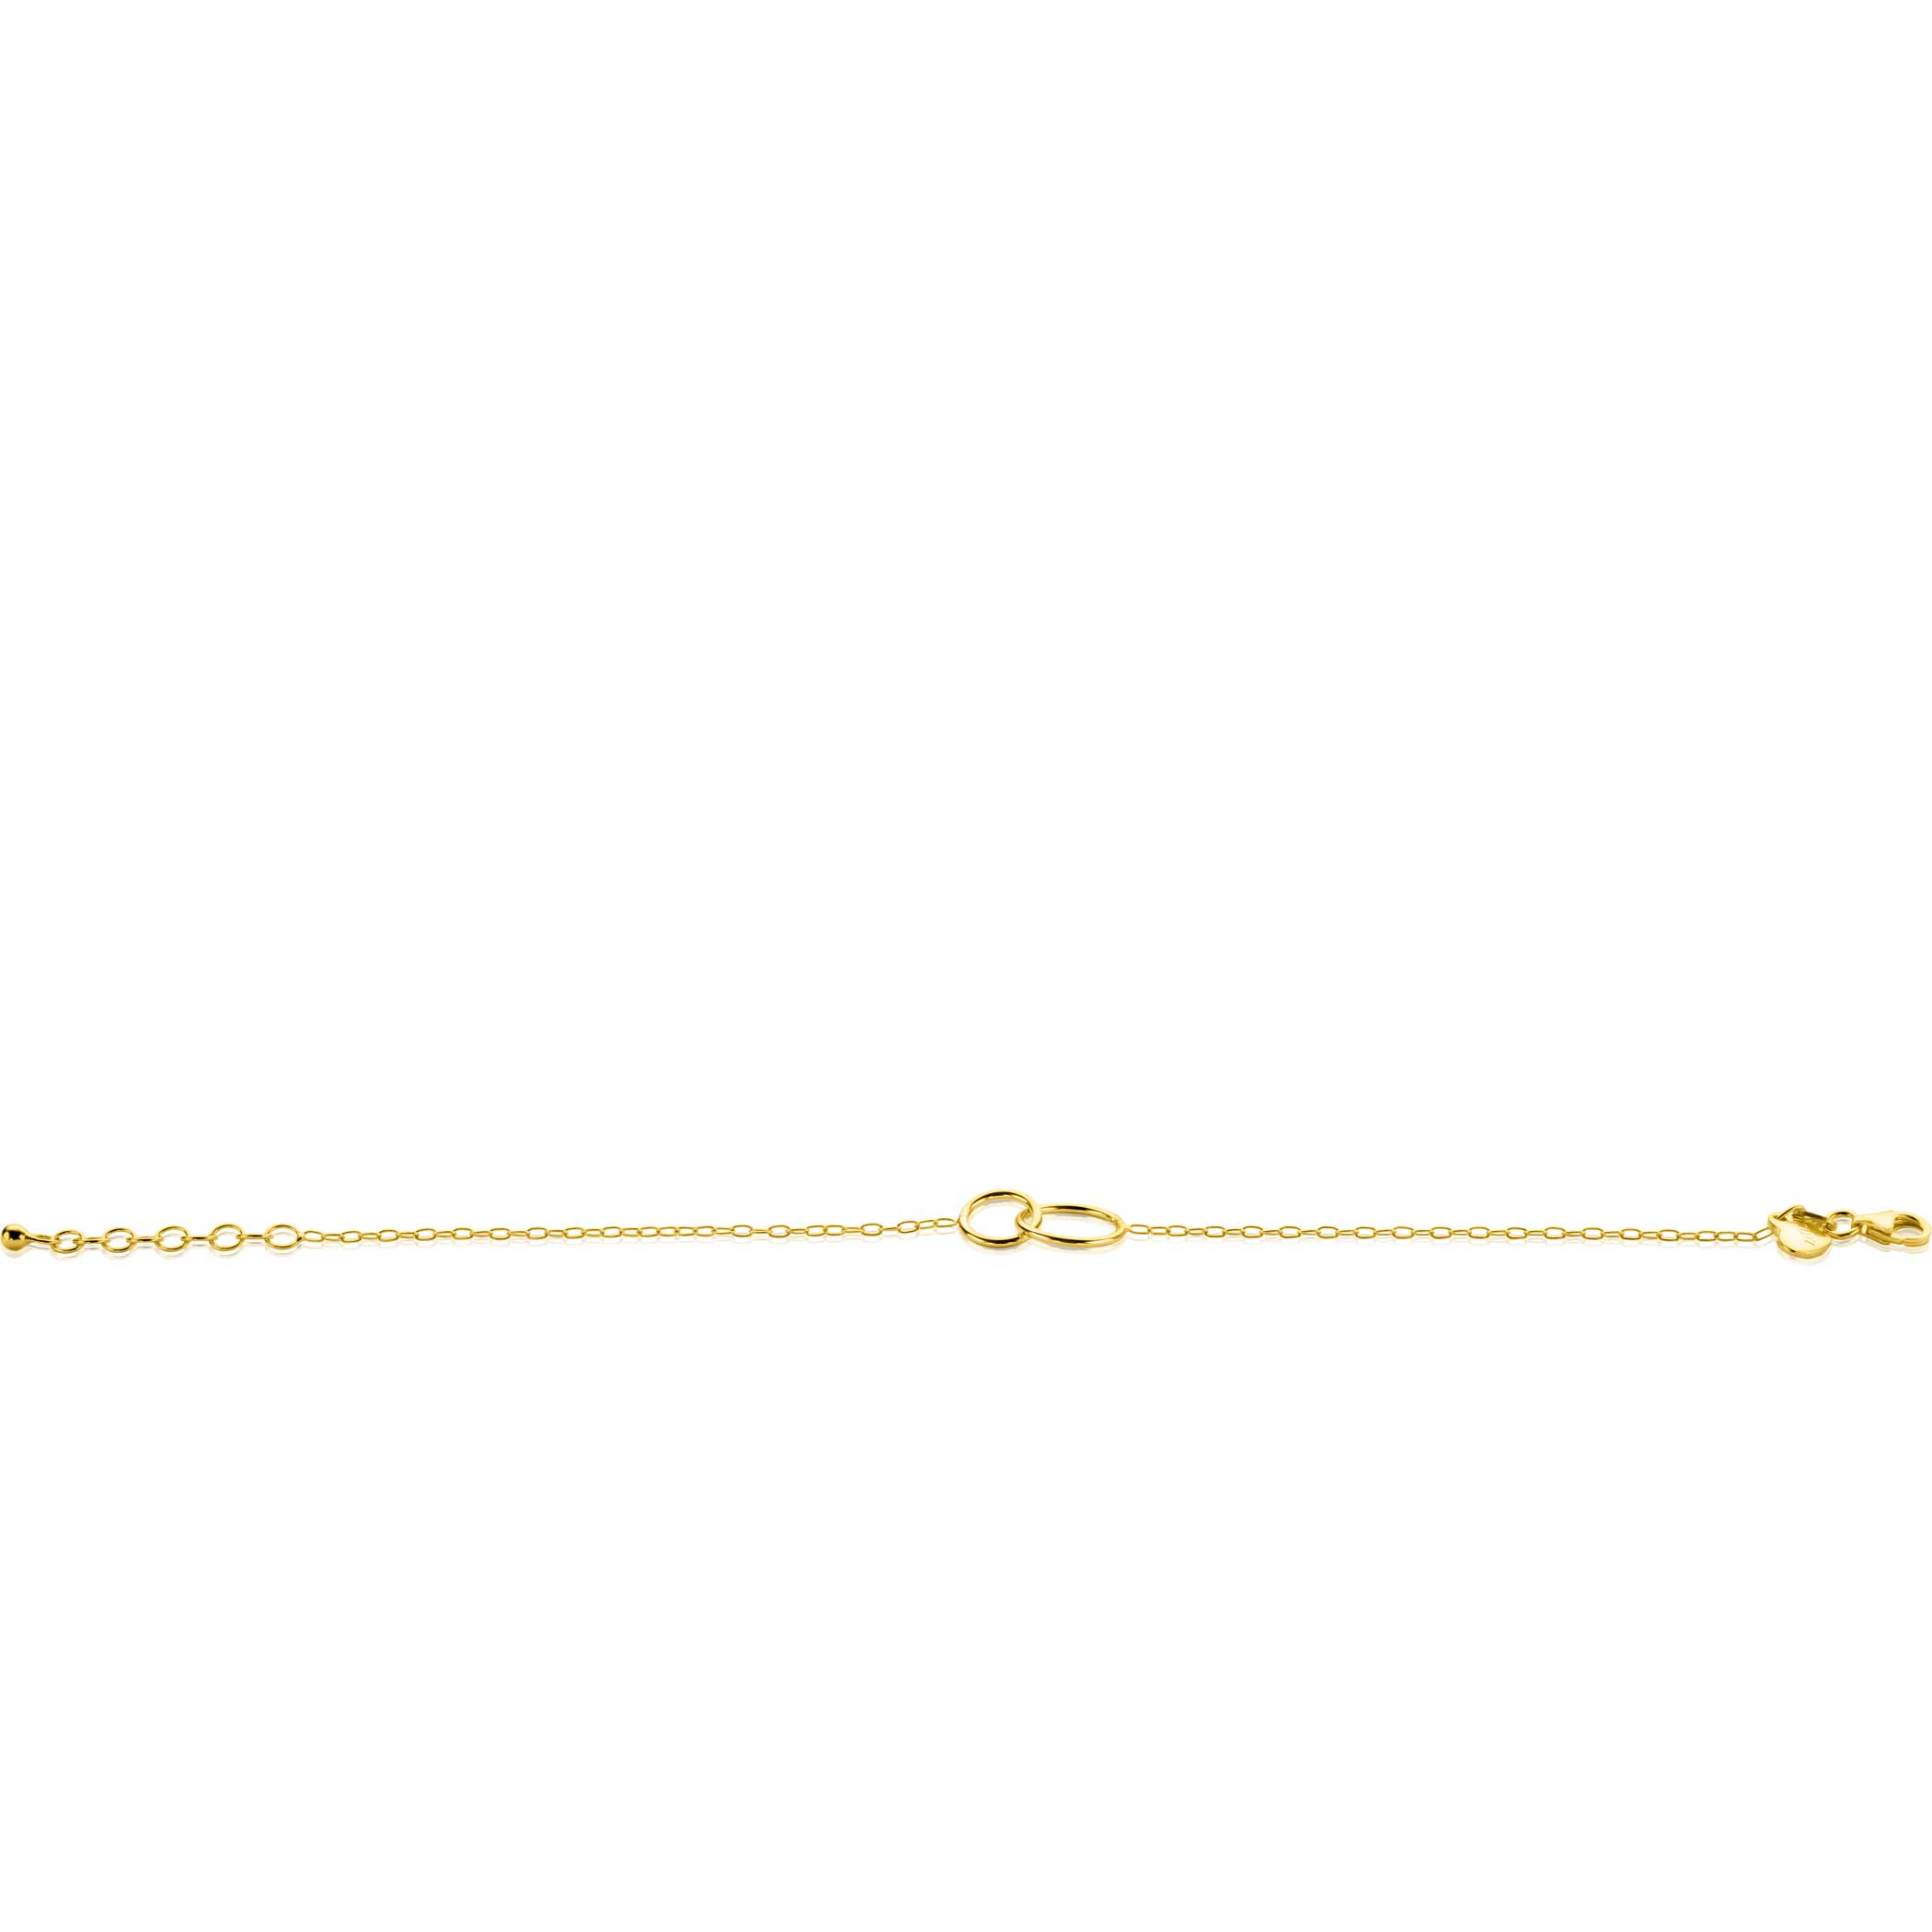 ZINZI Gold Plated Sterling Silver Paperclip Chain Bracelet with 2 Connected Open Circles 17-20cm ZIA2275G